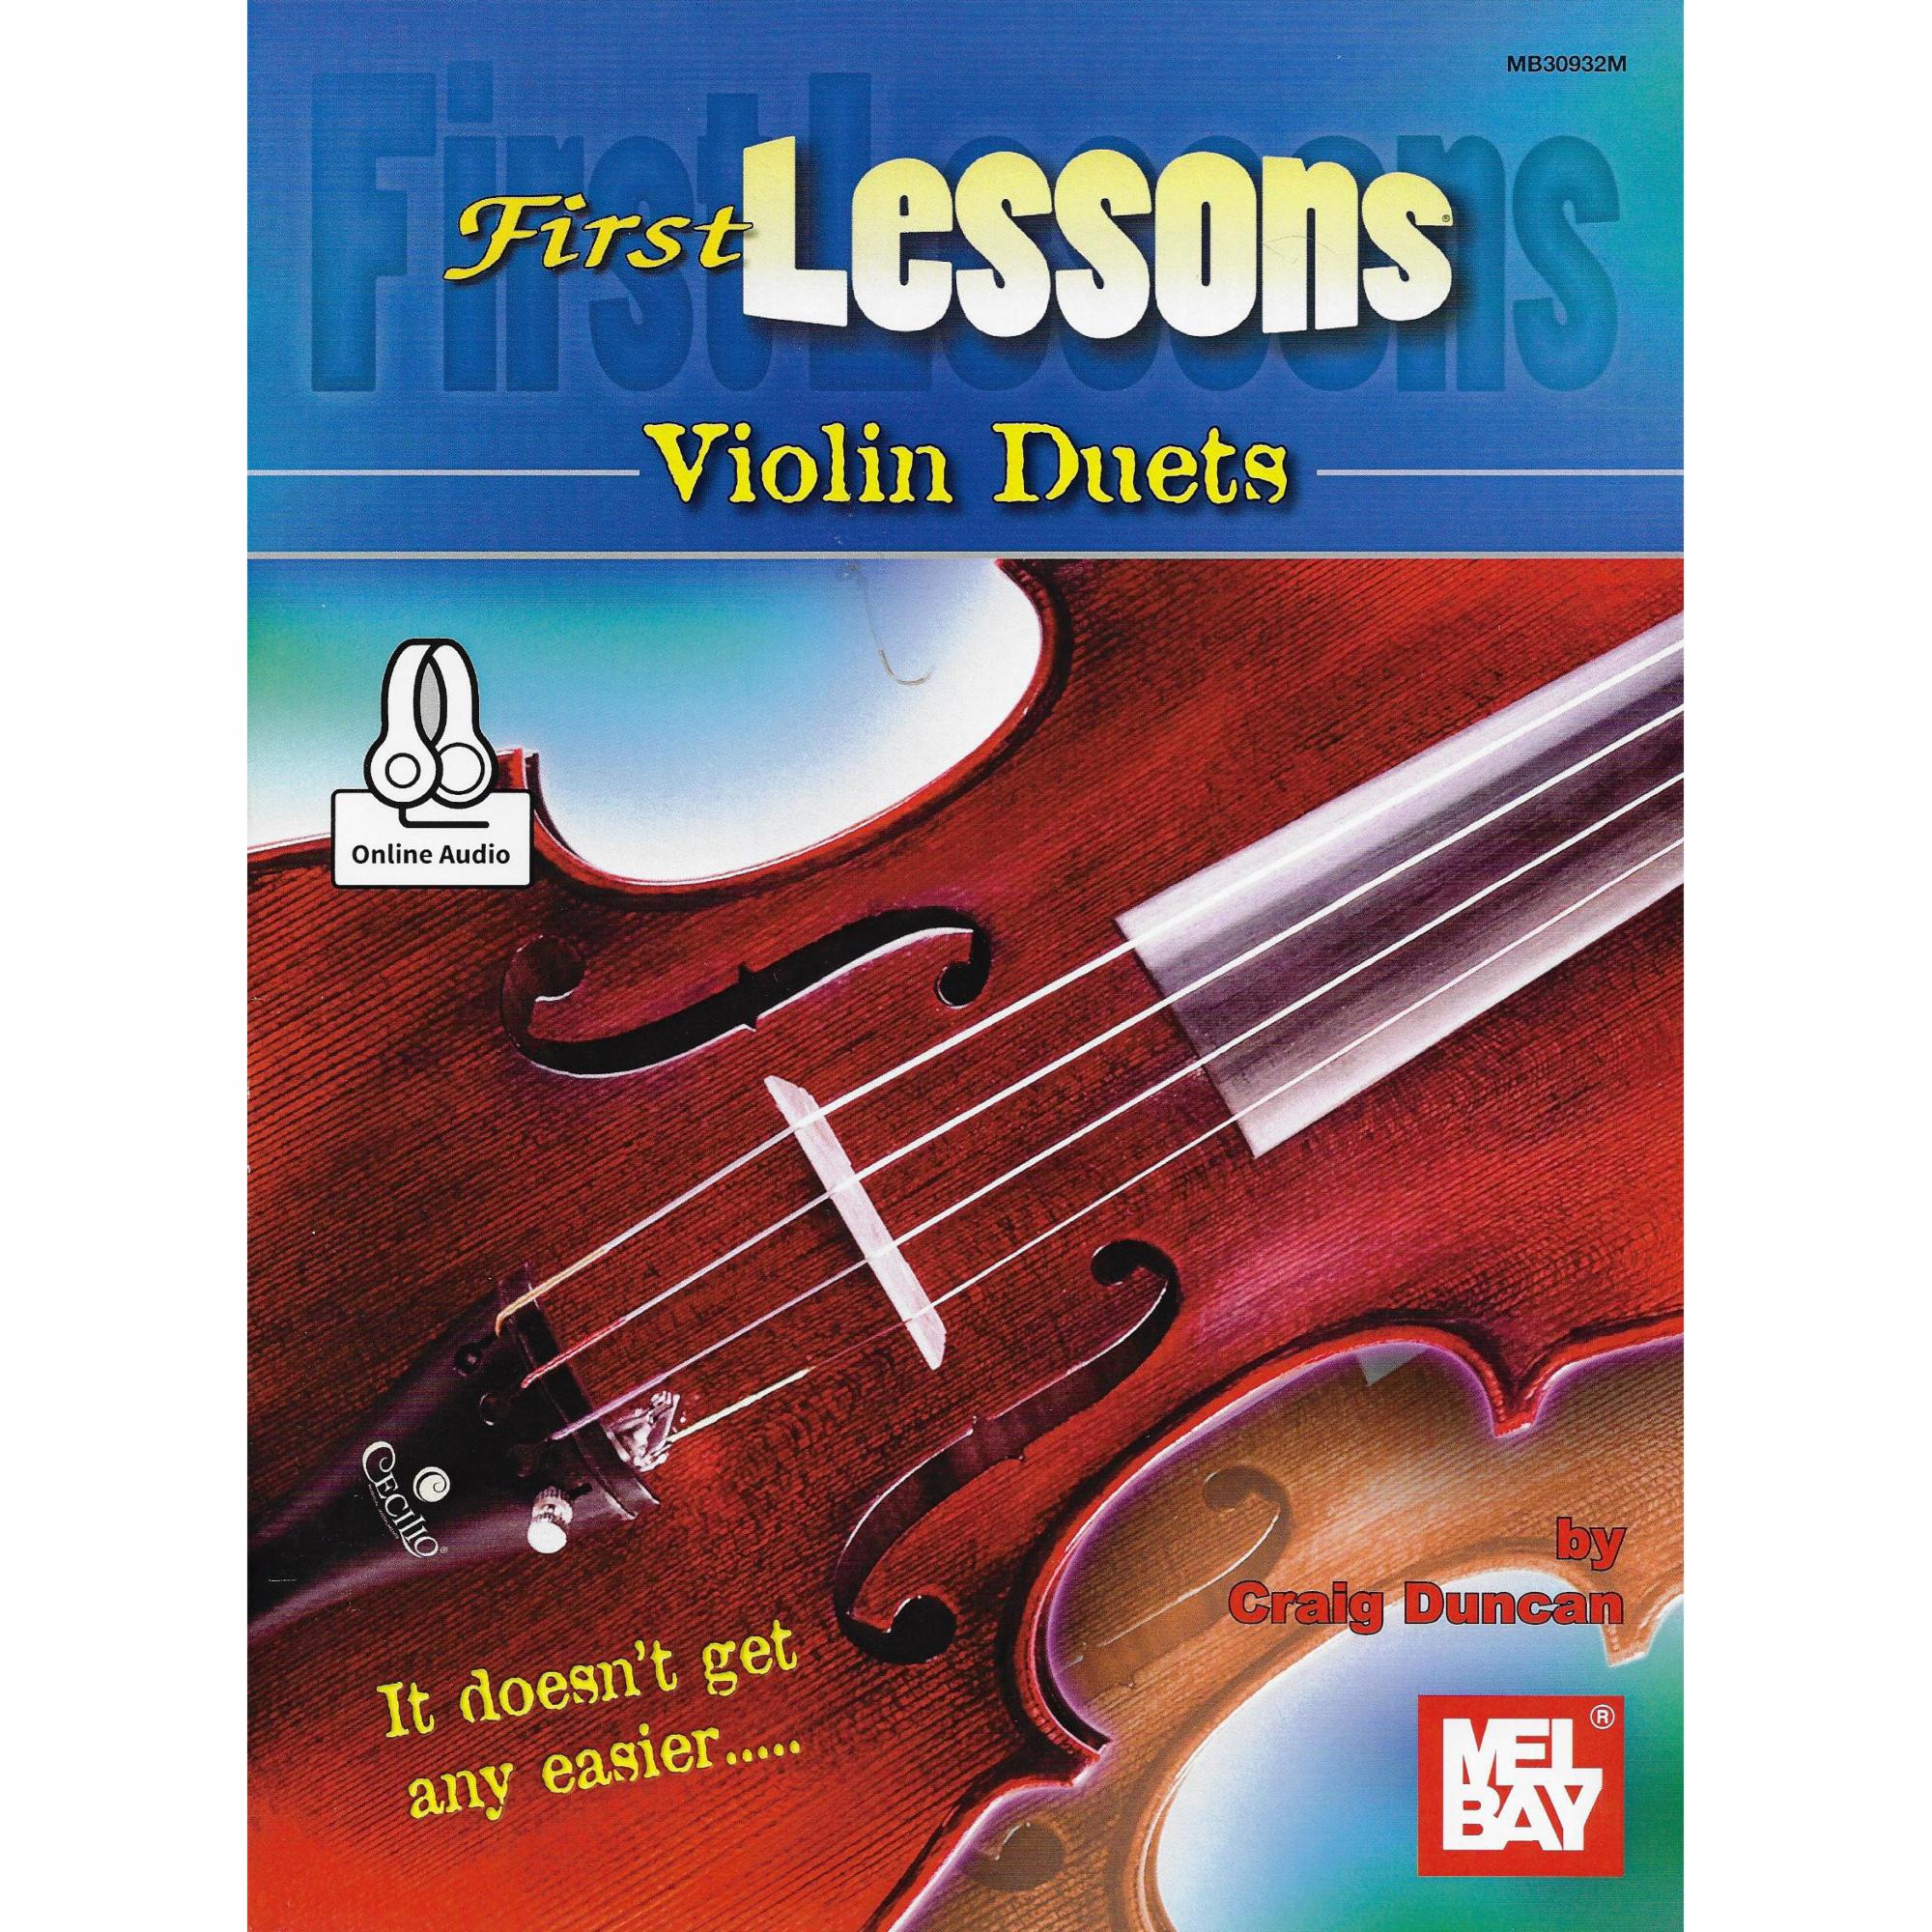 First Lessons: Violin Duets